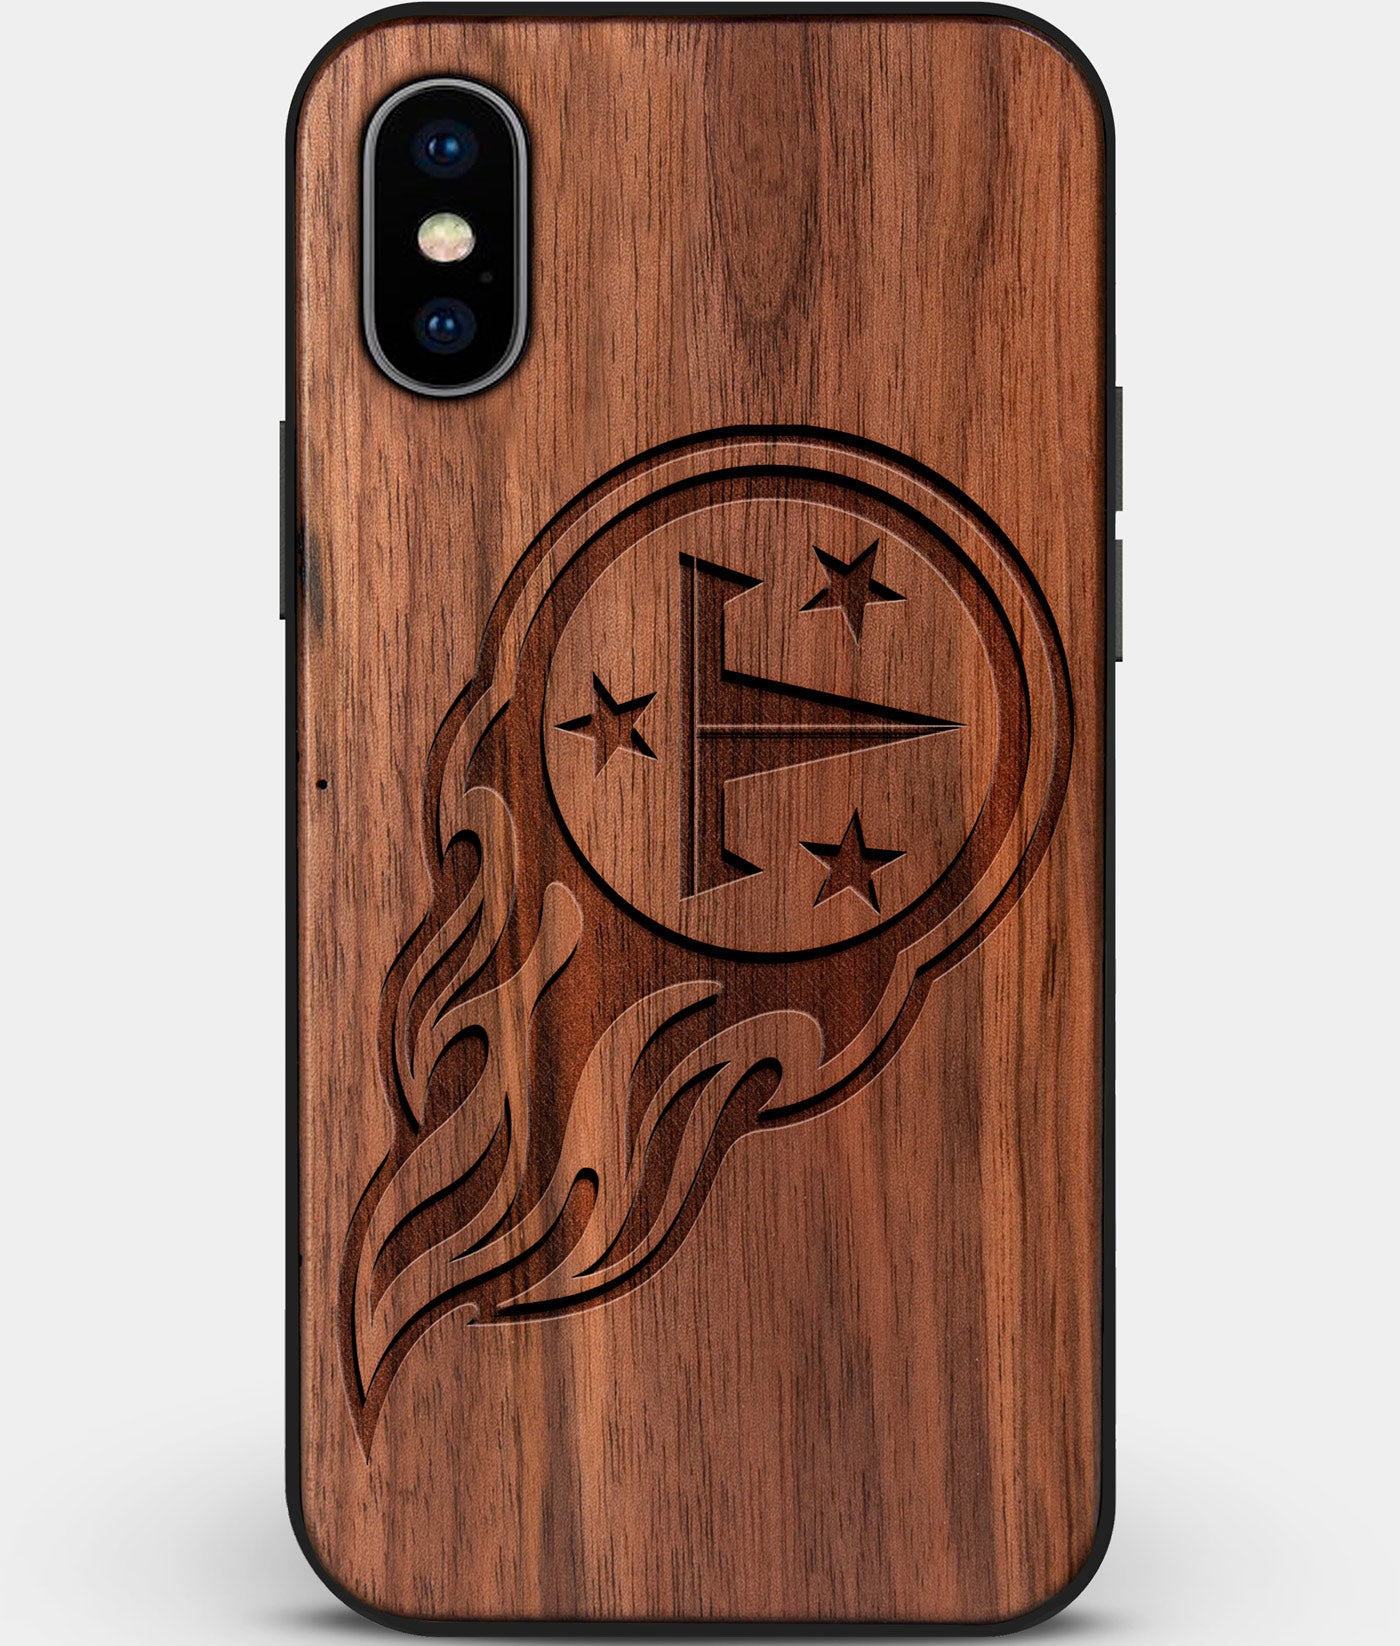 Custom Carved Wood Tennessee Titans iPhone X/XS Case | Personalized Walnut Wood Tennessee Titans Cover, Birthday Gift, Gifts For Him, Monogrammed Gift For Fan | by Engraved In Nature